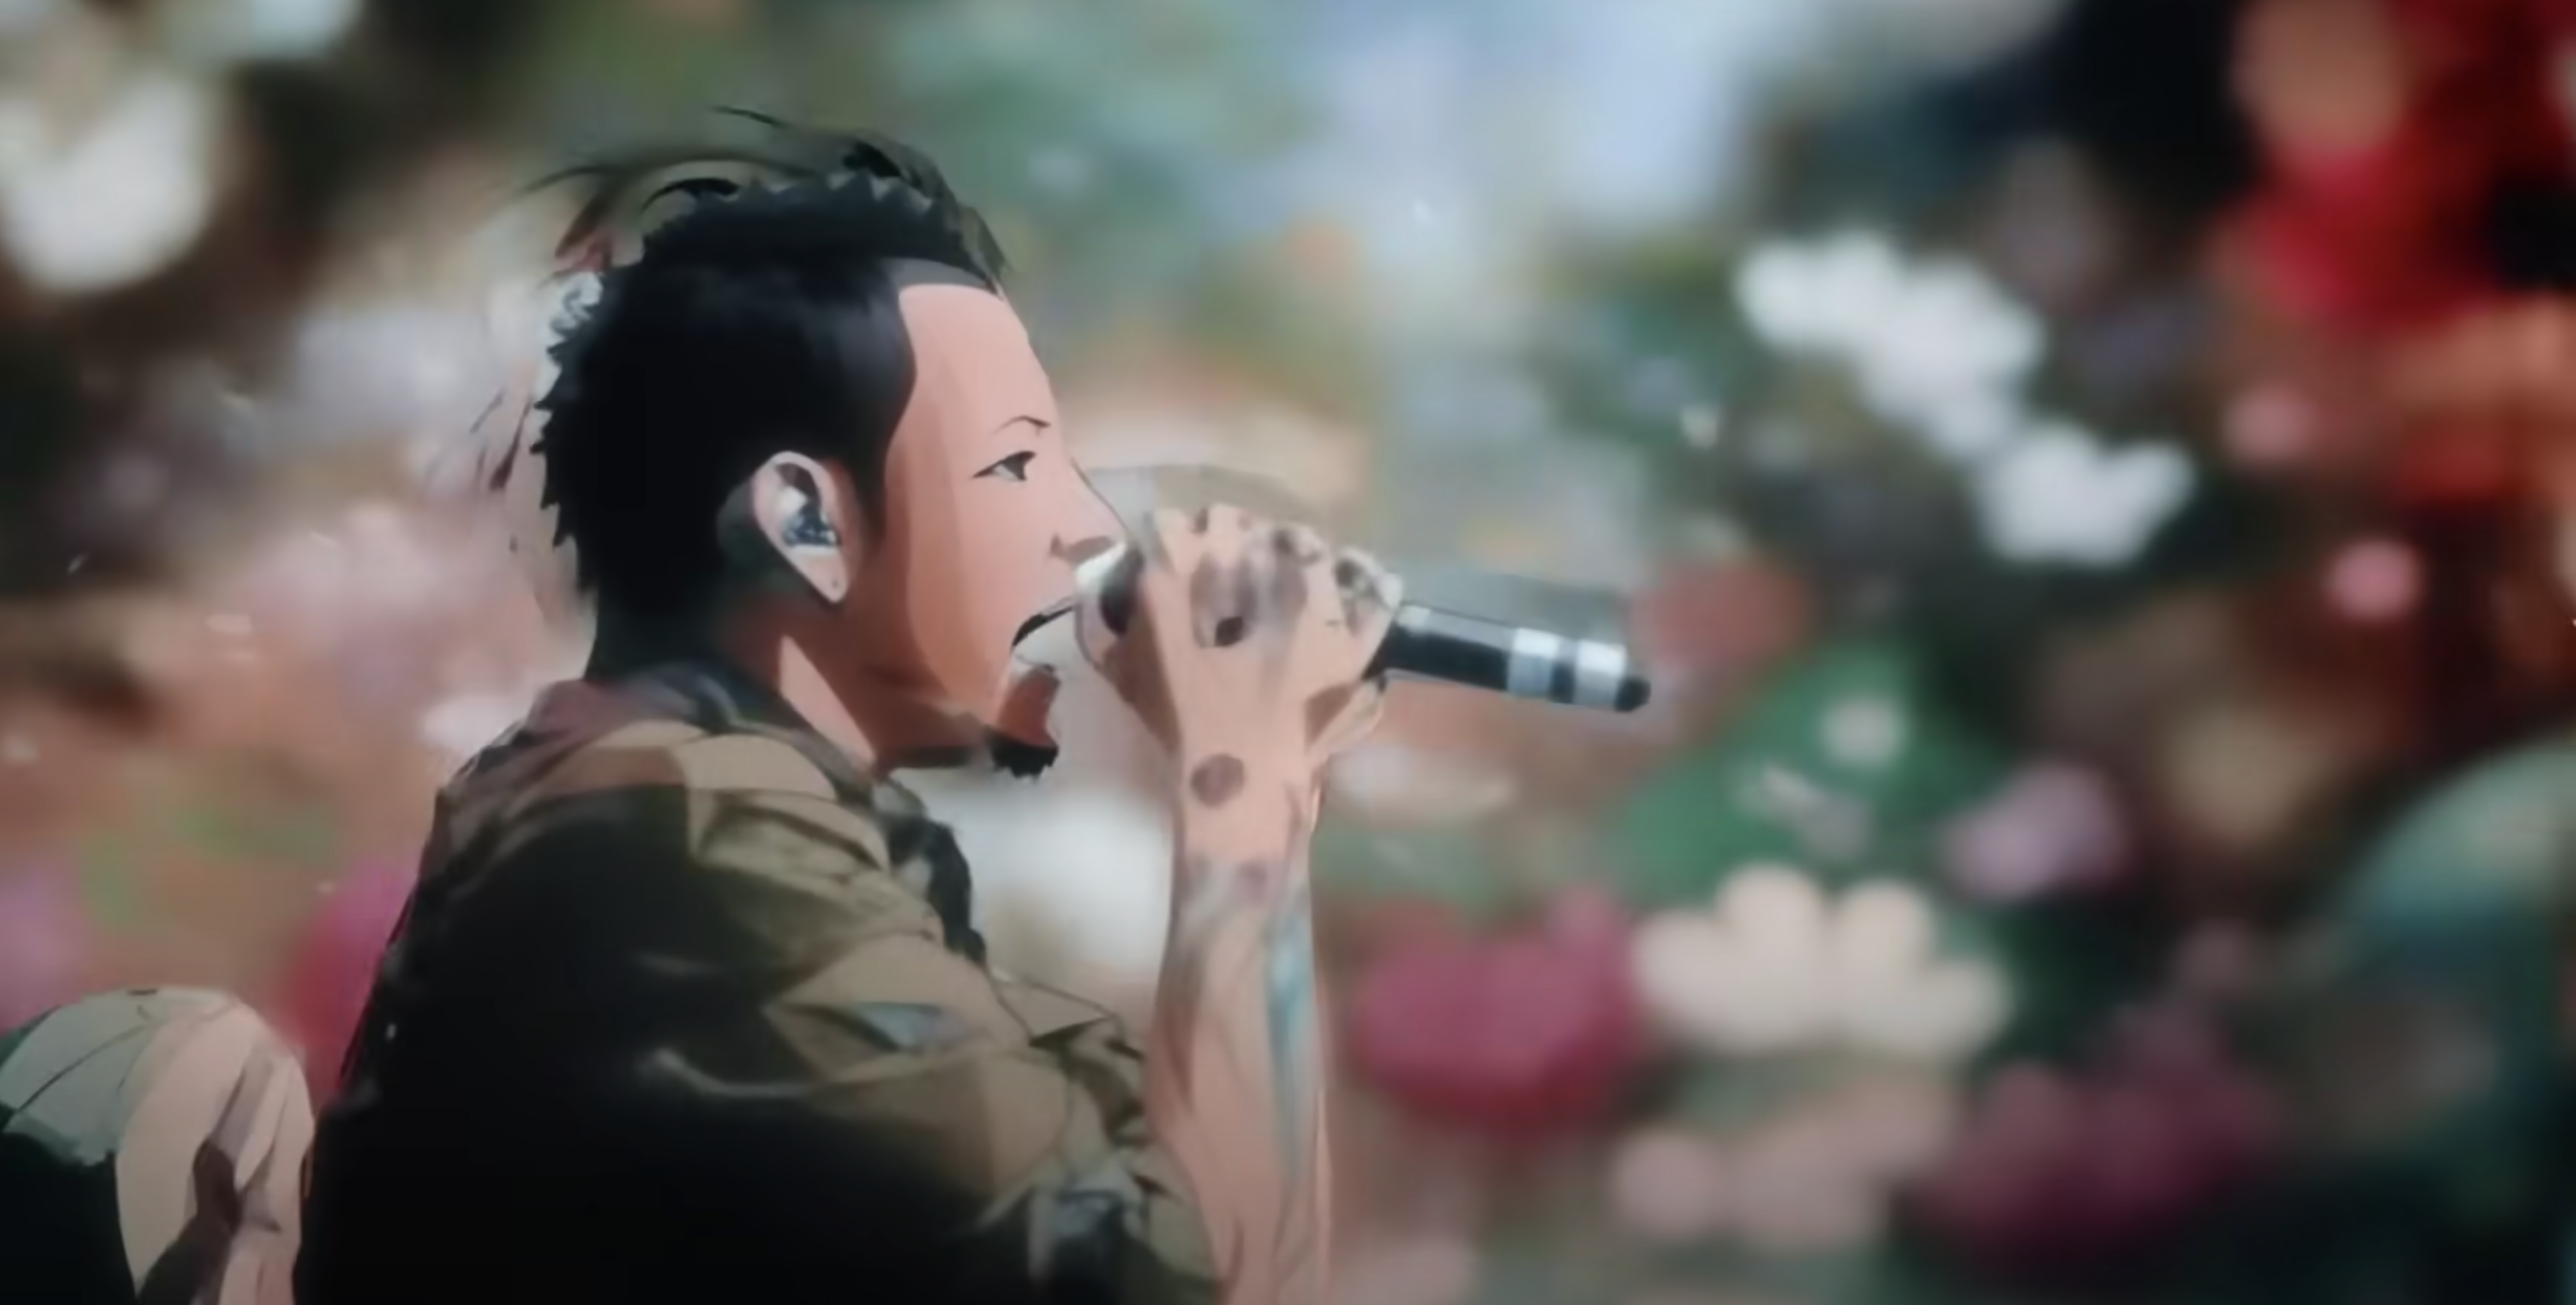 Linkin Park releases new song 'Lost' featuring Chester Bennington